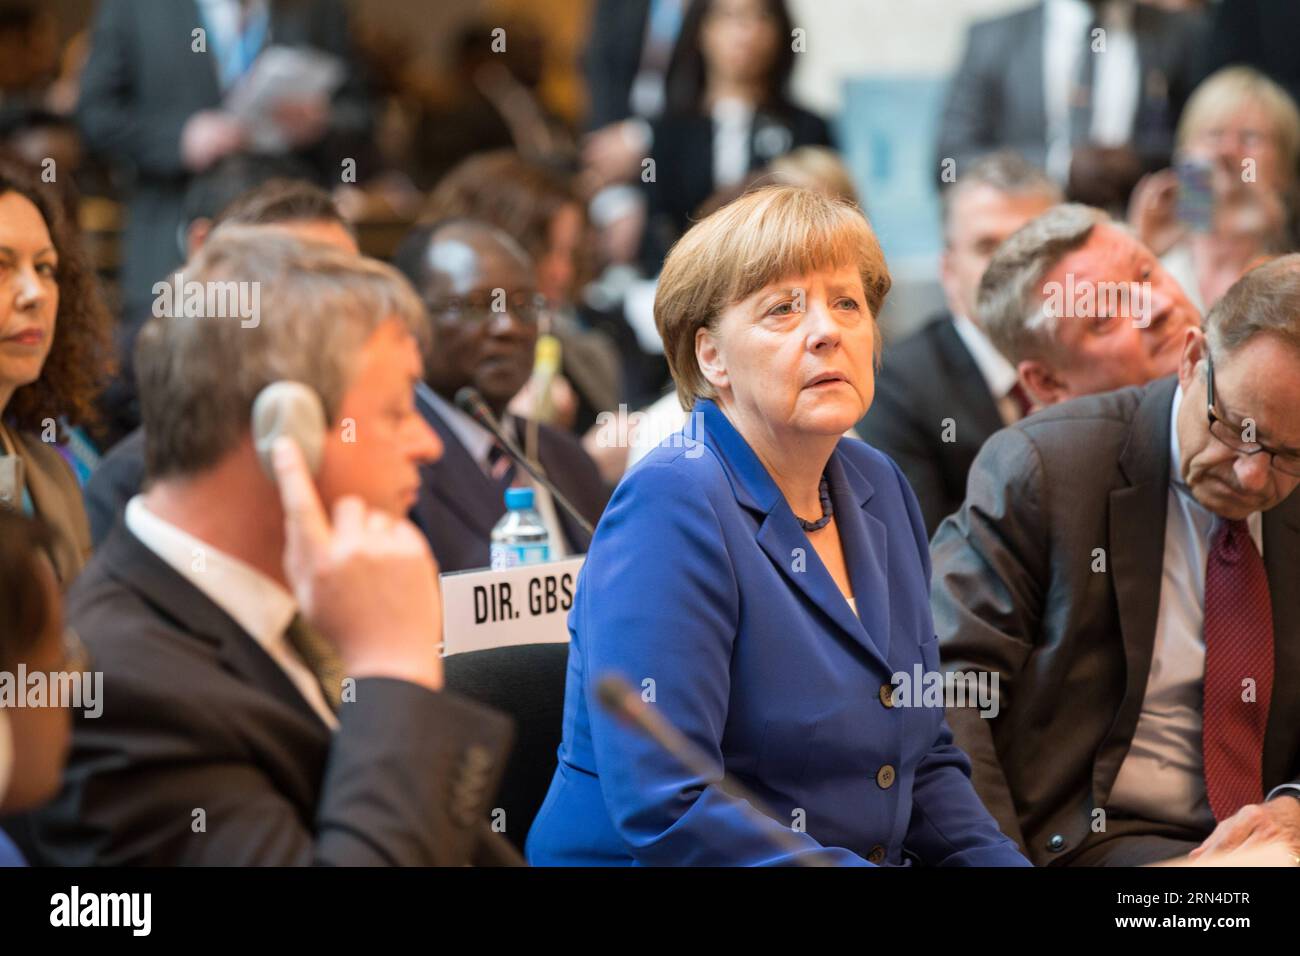 POLITIK WHO-Jahresversammlung in Genf (150518) -- GENEVA, May 18, 2015 -- German Chancellor Angela Merkel (front C) attends the opening ceremony of the 68th session of the World Health Assembly (WHA) in Geneva, Switzerland, on May 18, 2015. The 68th session of the WHA on Monday kicked off here, over 3,000 delegates from 194 member states would focus on the discussion of Ebola outbreaks and the post-2015 health agenda. ) SWITZERLAND-GENEVA-WHA-68TH SESSION XuxJinquan PUBLICATIONxNOTxINxCHN   politics Who Annual Meeting in Geneva  Geneva May 18 2015 German Chancellor Angela Merkel Front C Attend Stock Photo